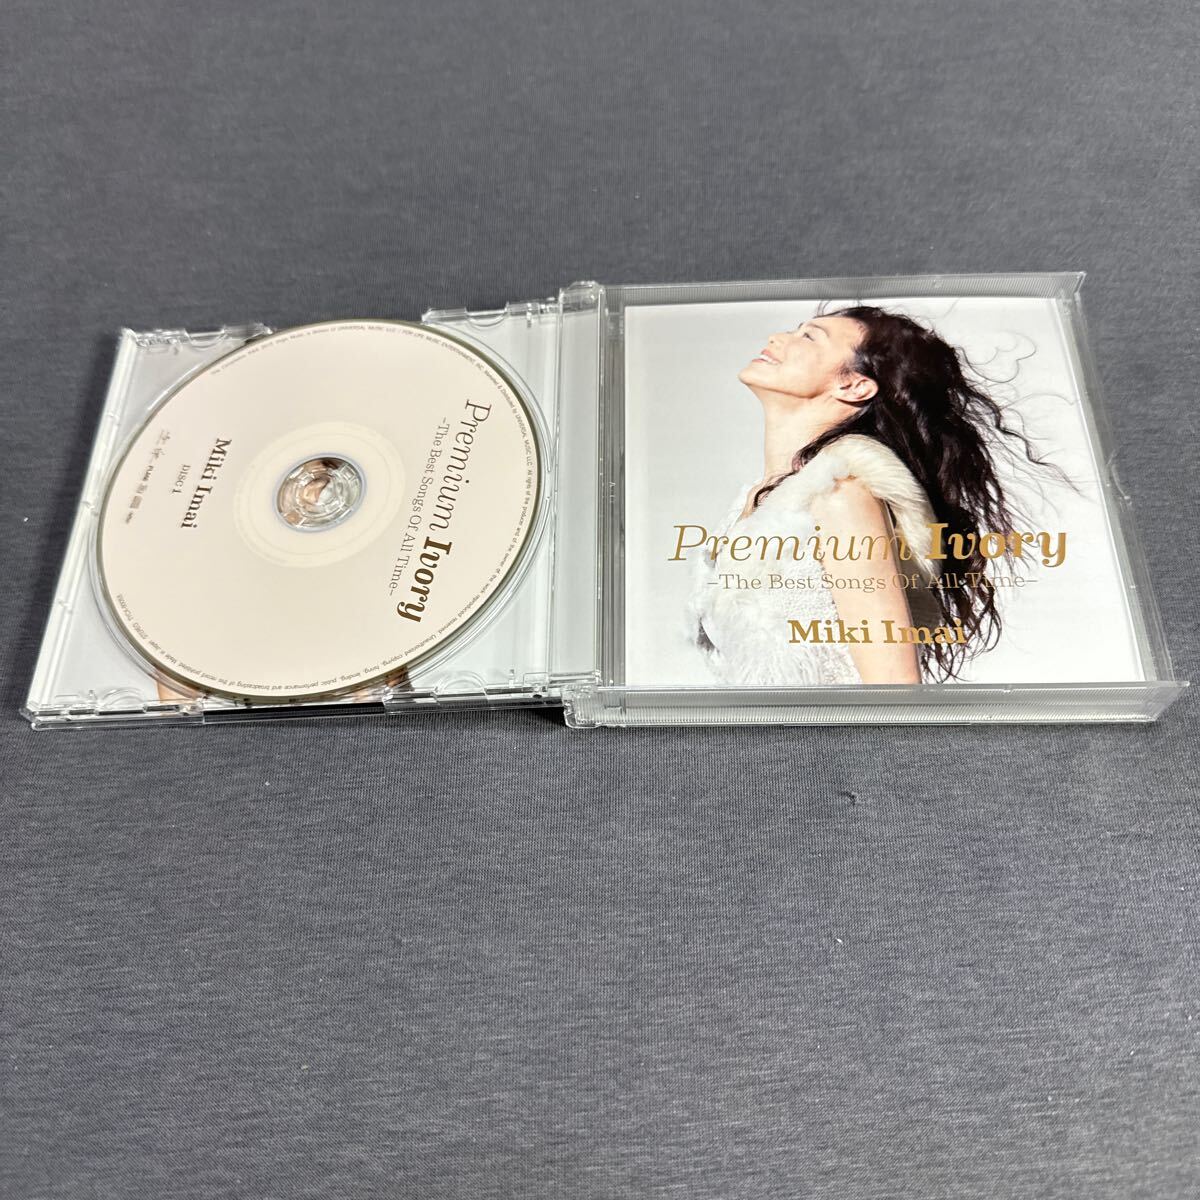 Premium Ivory -The Best Songs Of All Time- (初回限定盤) (2CD+DVD) (UHQ-CD仕様)_画像3